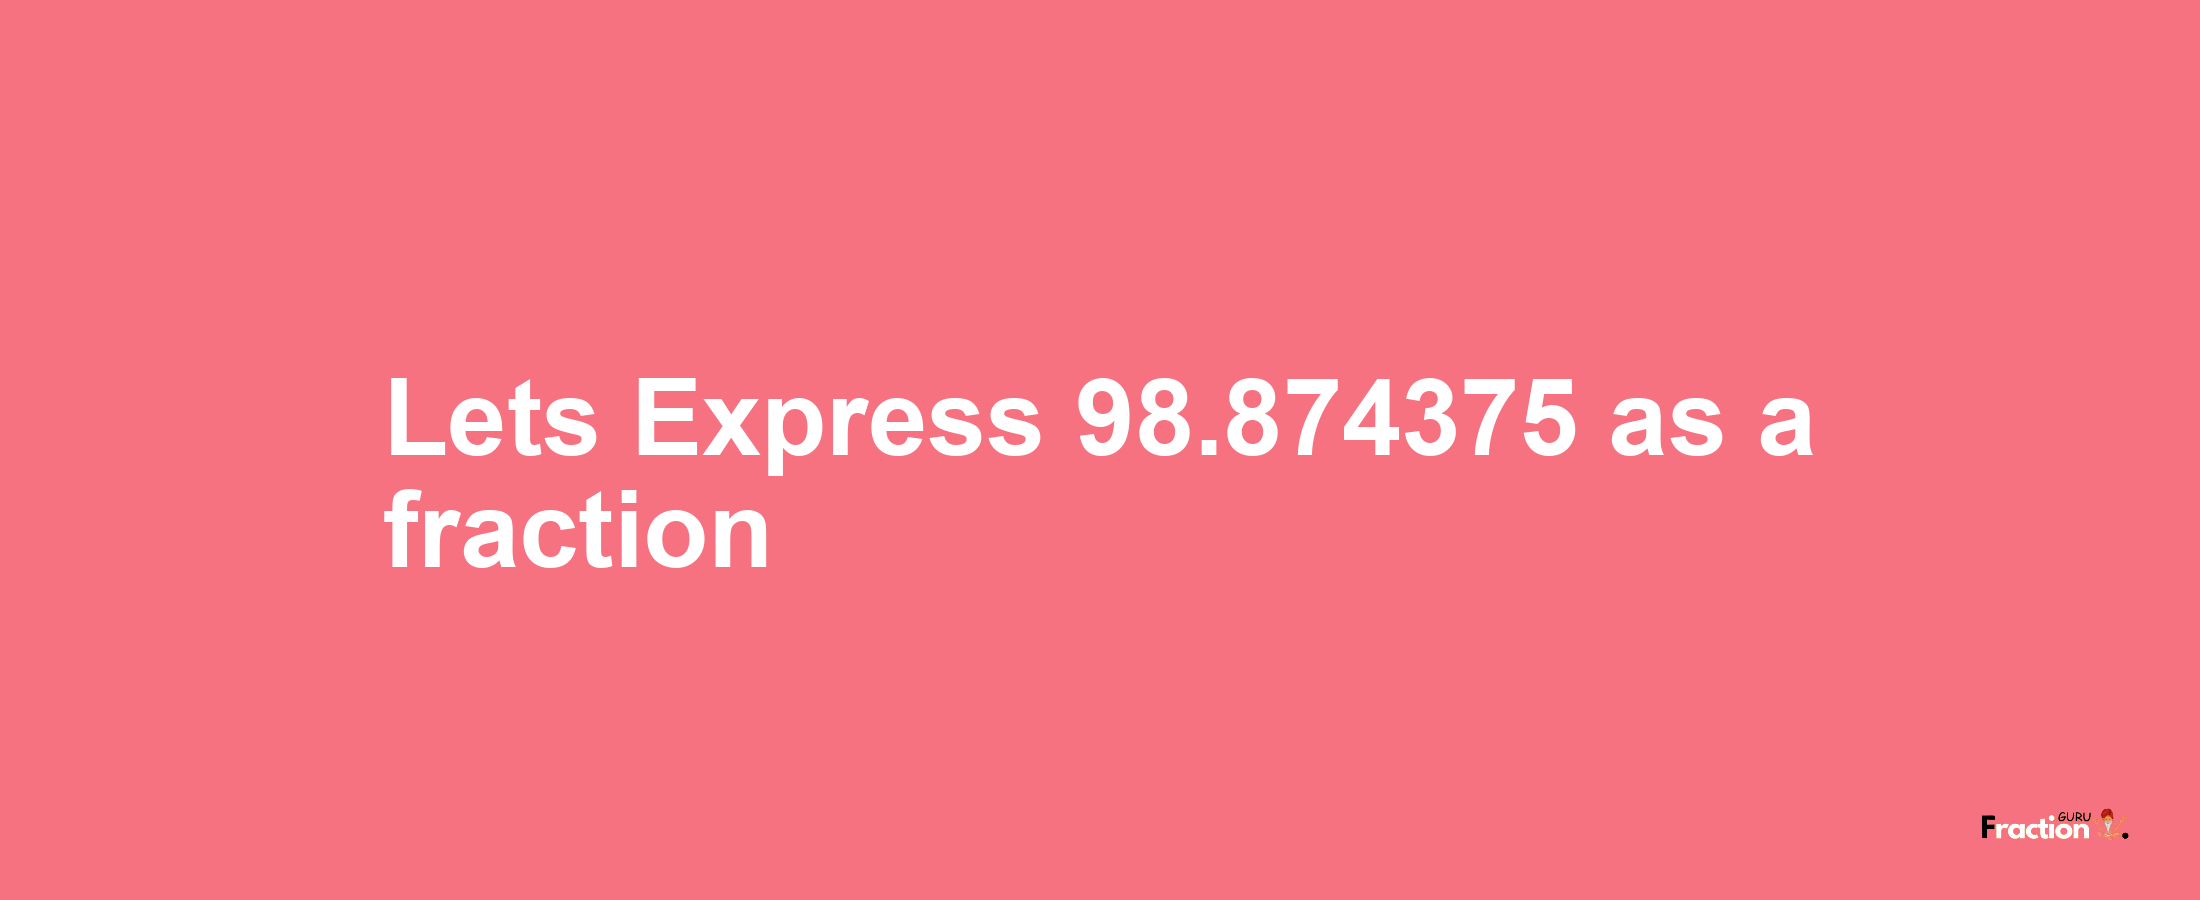 Lets Express 98.874375 as afraction